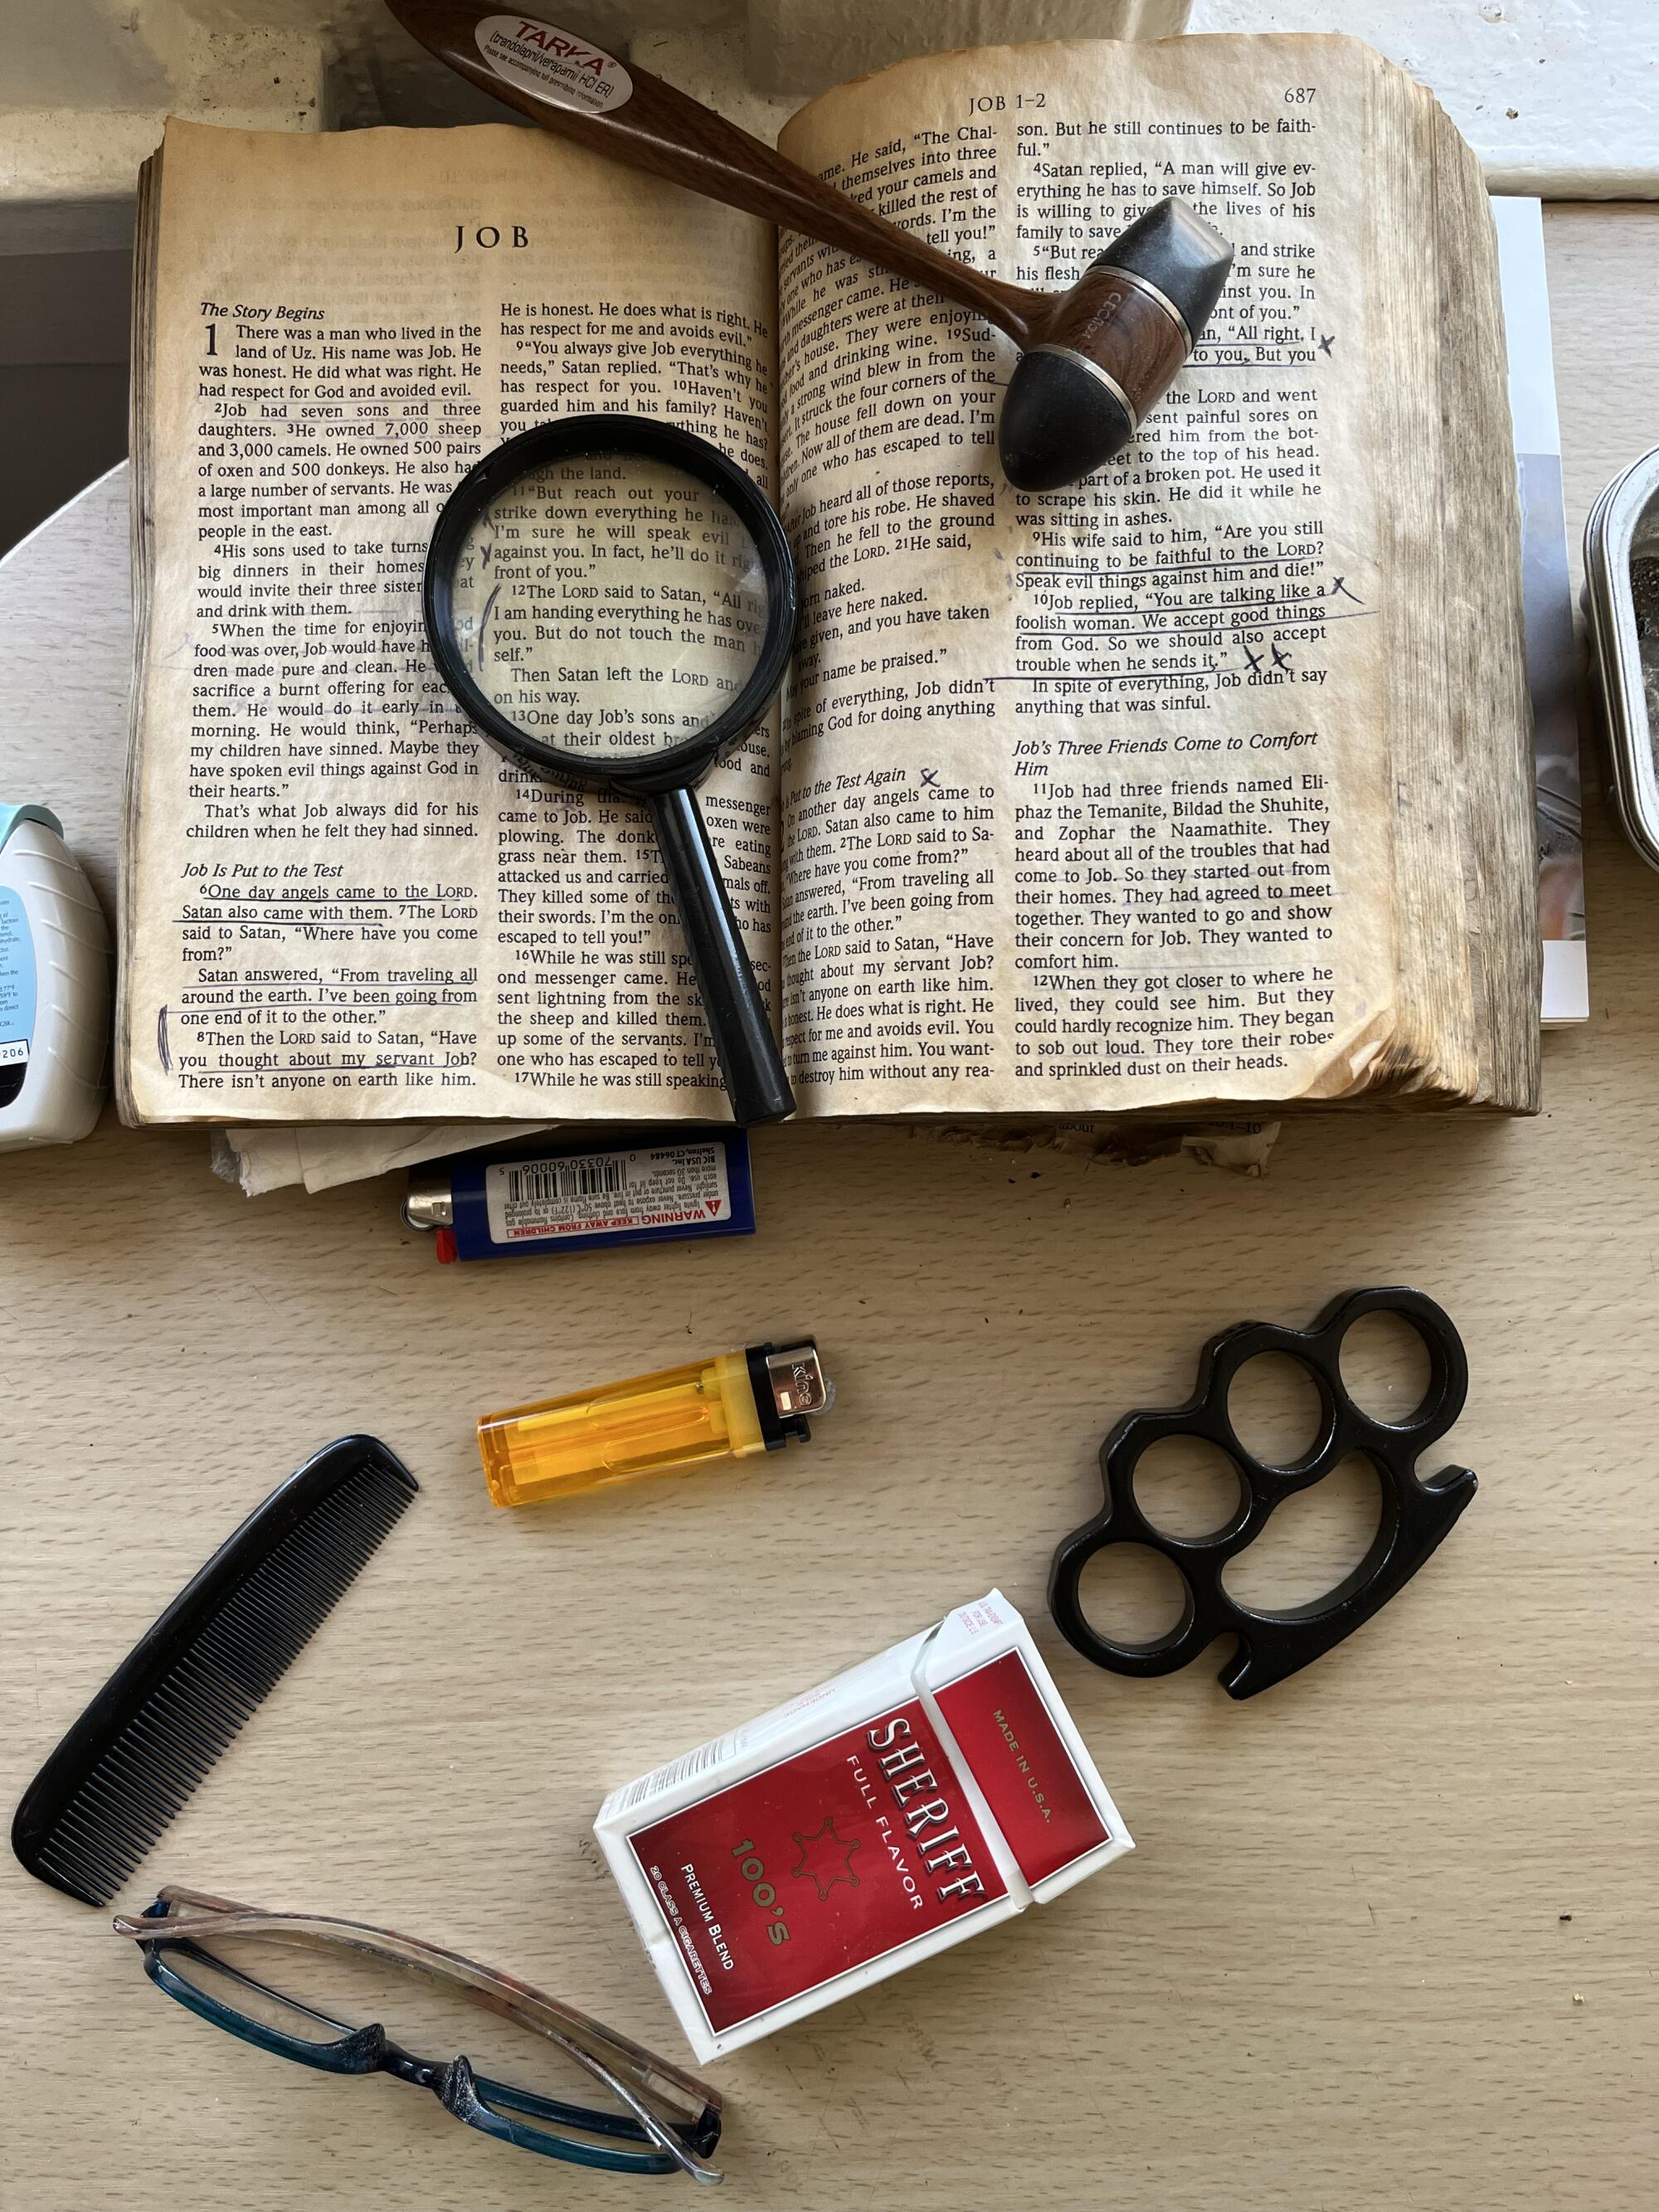 The Bible is open to the Book of Job next to a brass knuckle, lighters, cigarettes, a comb and reading glasses.